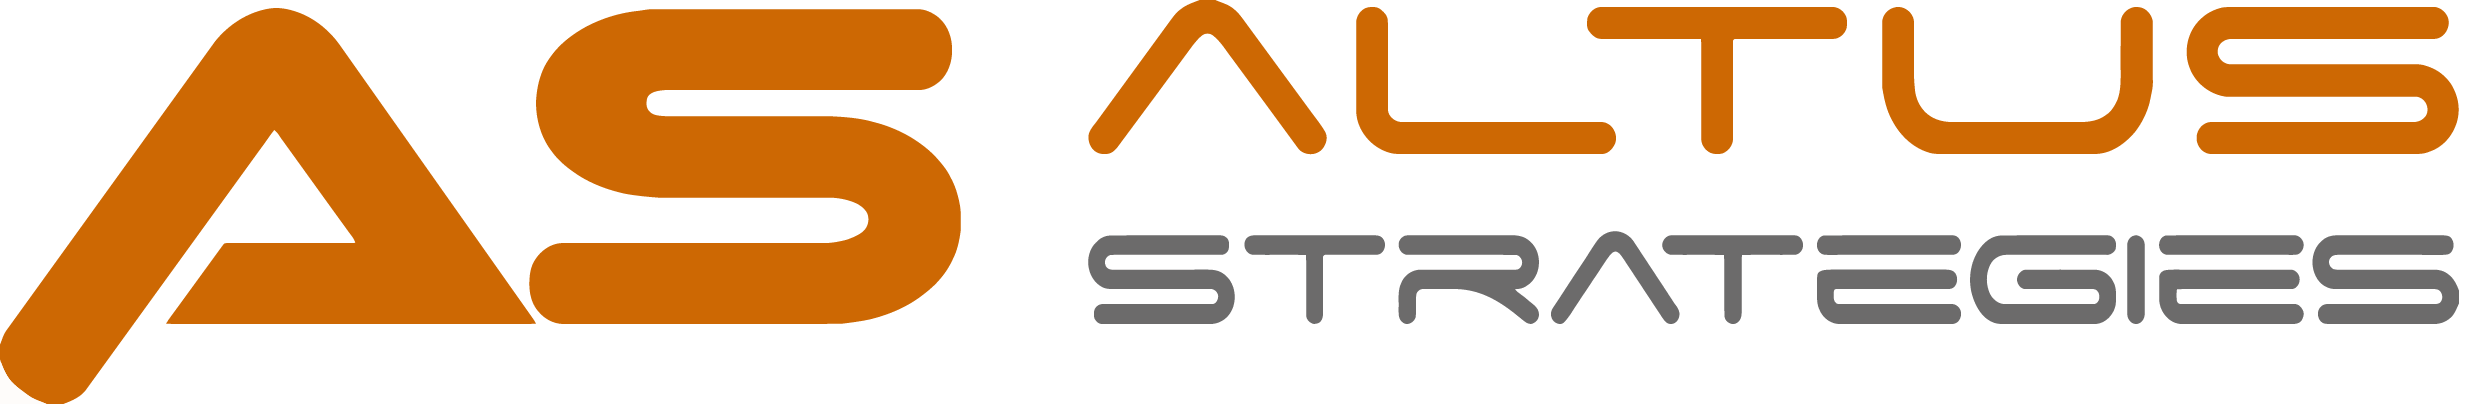 Altus Strategies Plc, Tuesday, February 9, 2021, Press release picture